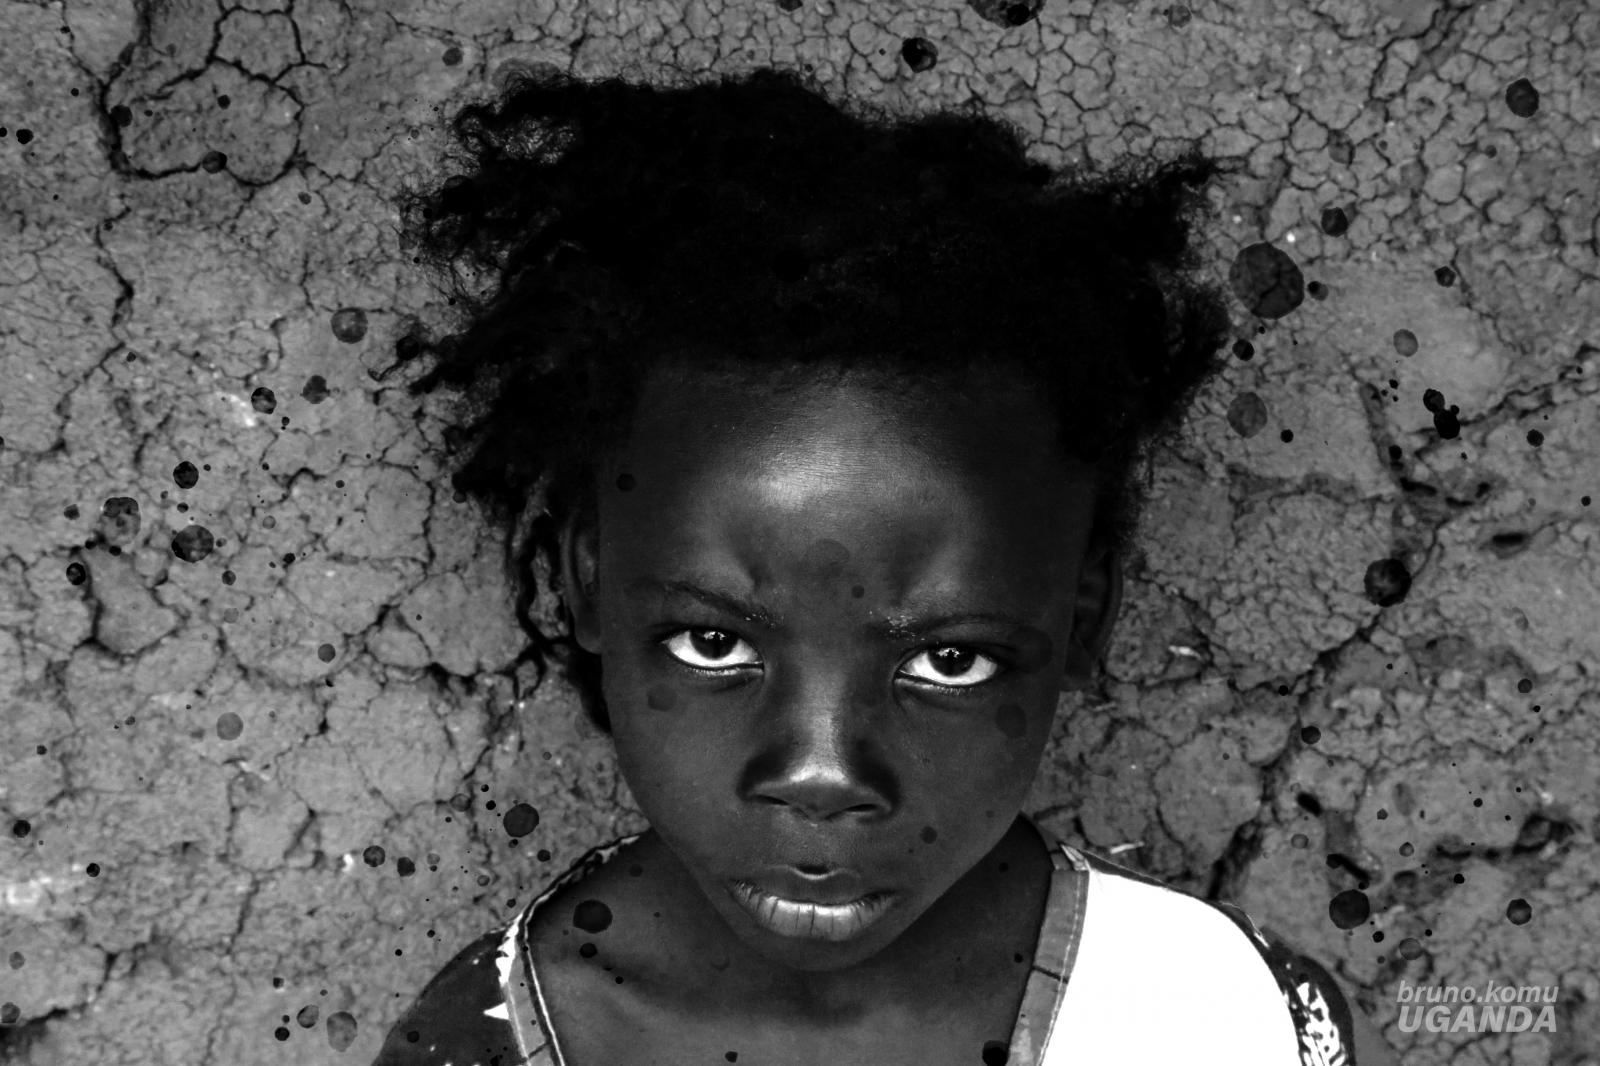 African child documentary